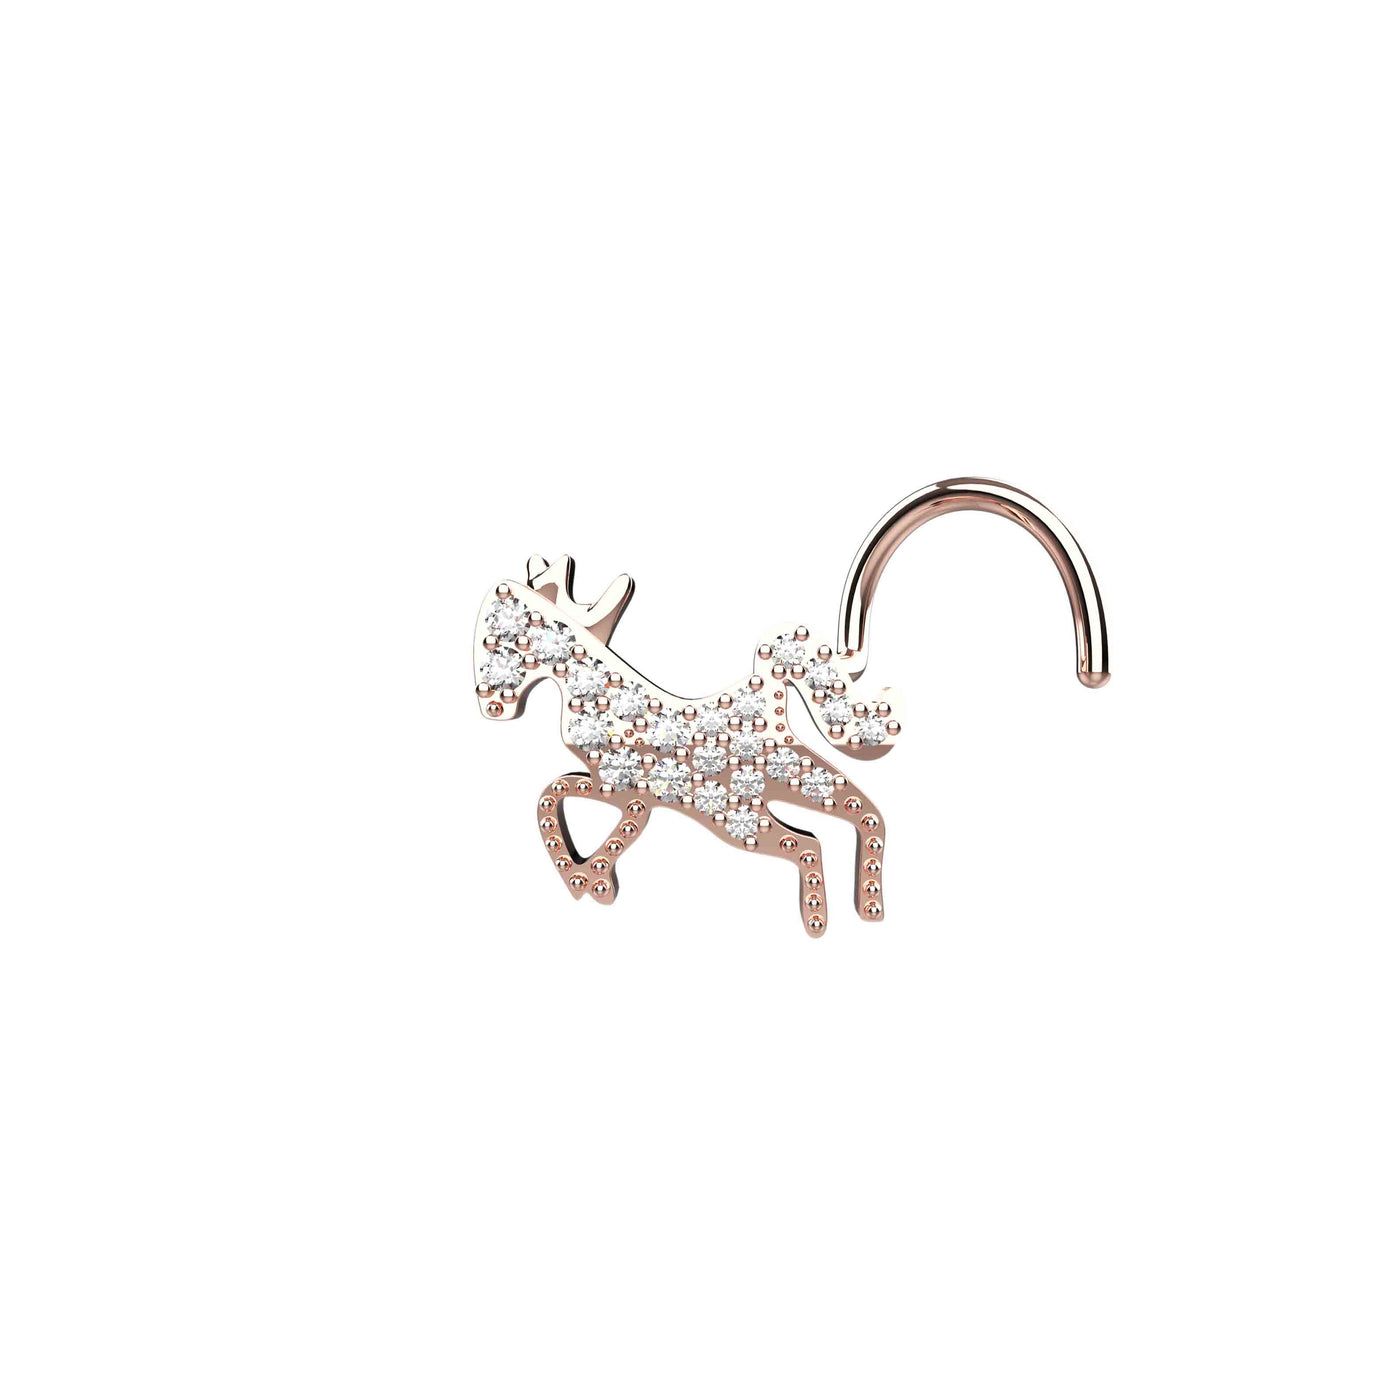 Horse Clear Nose Stud